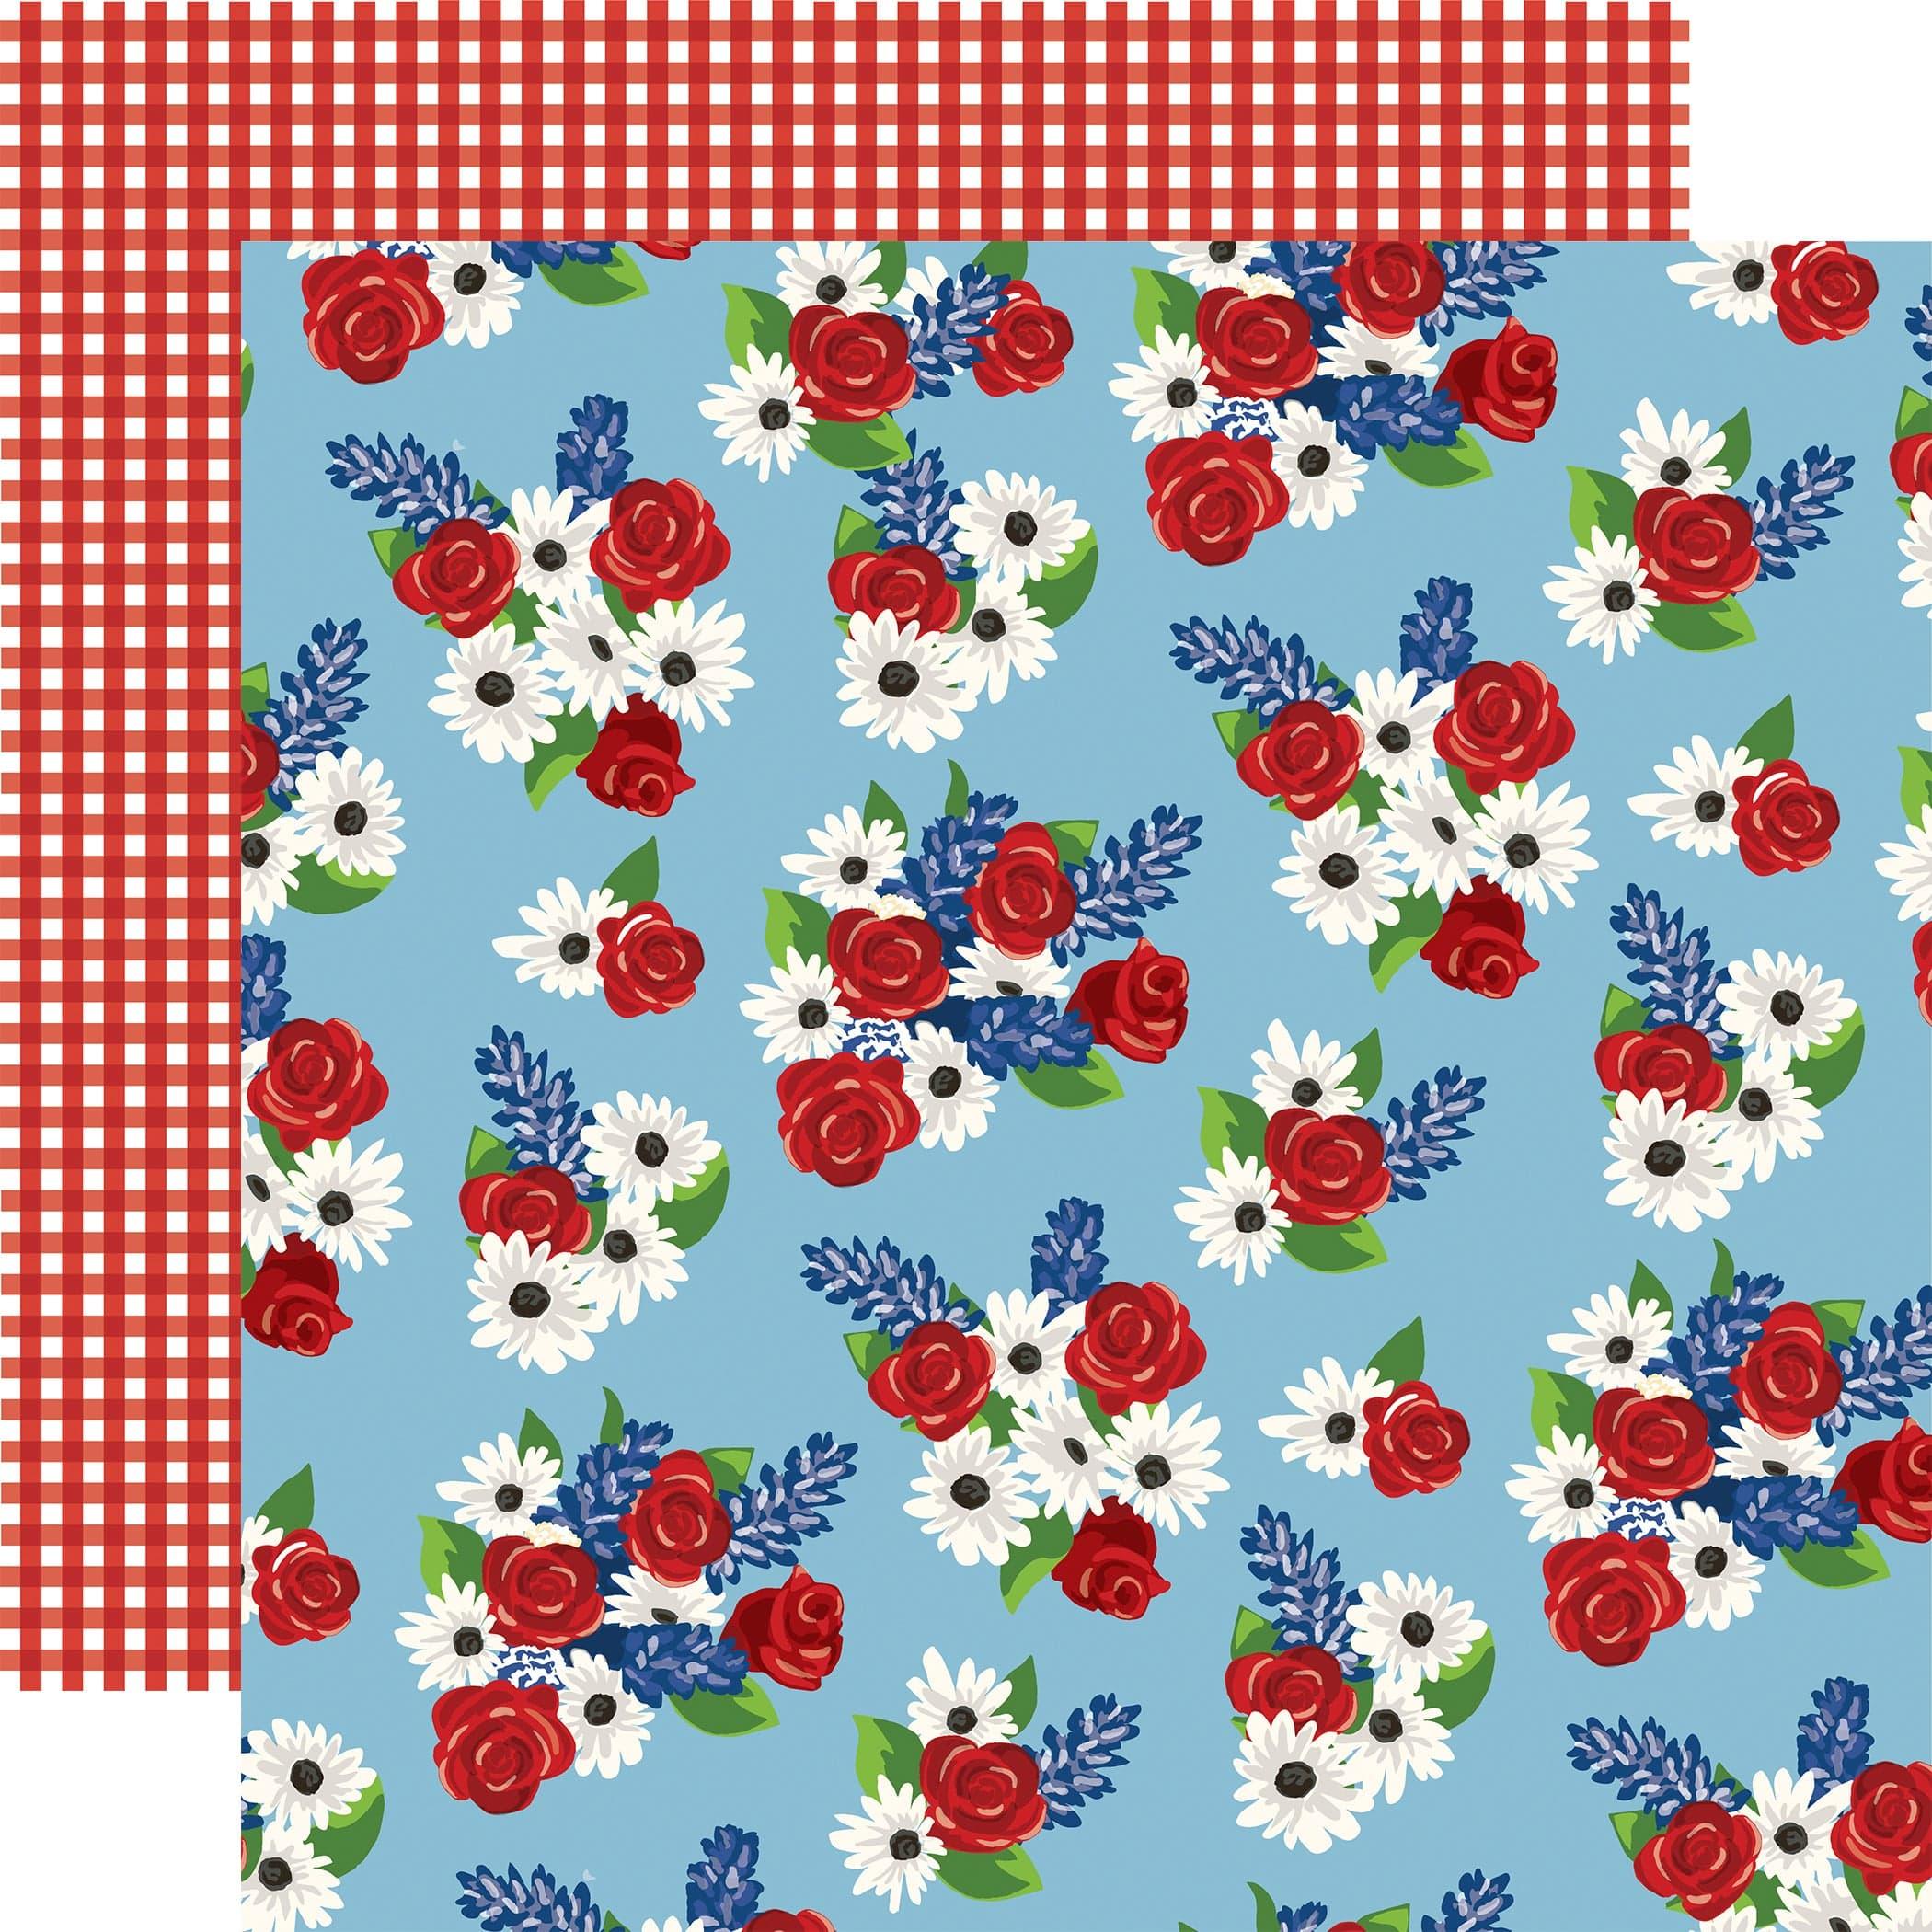 God Bless America Collection Fourth Floral 12 x 12 Double-Sided Scrapbook Paper by Carta Bella - Scrapbook Supply Companies